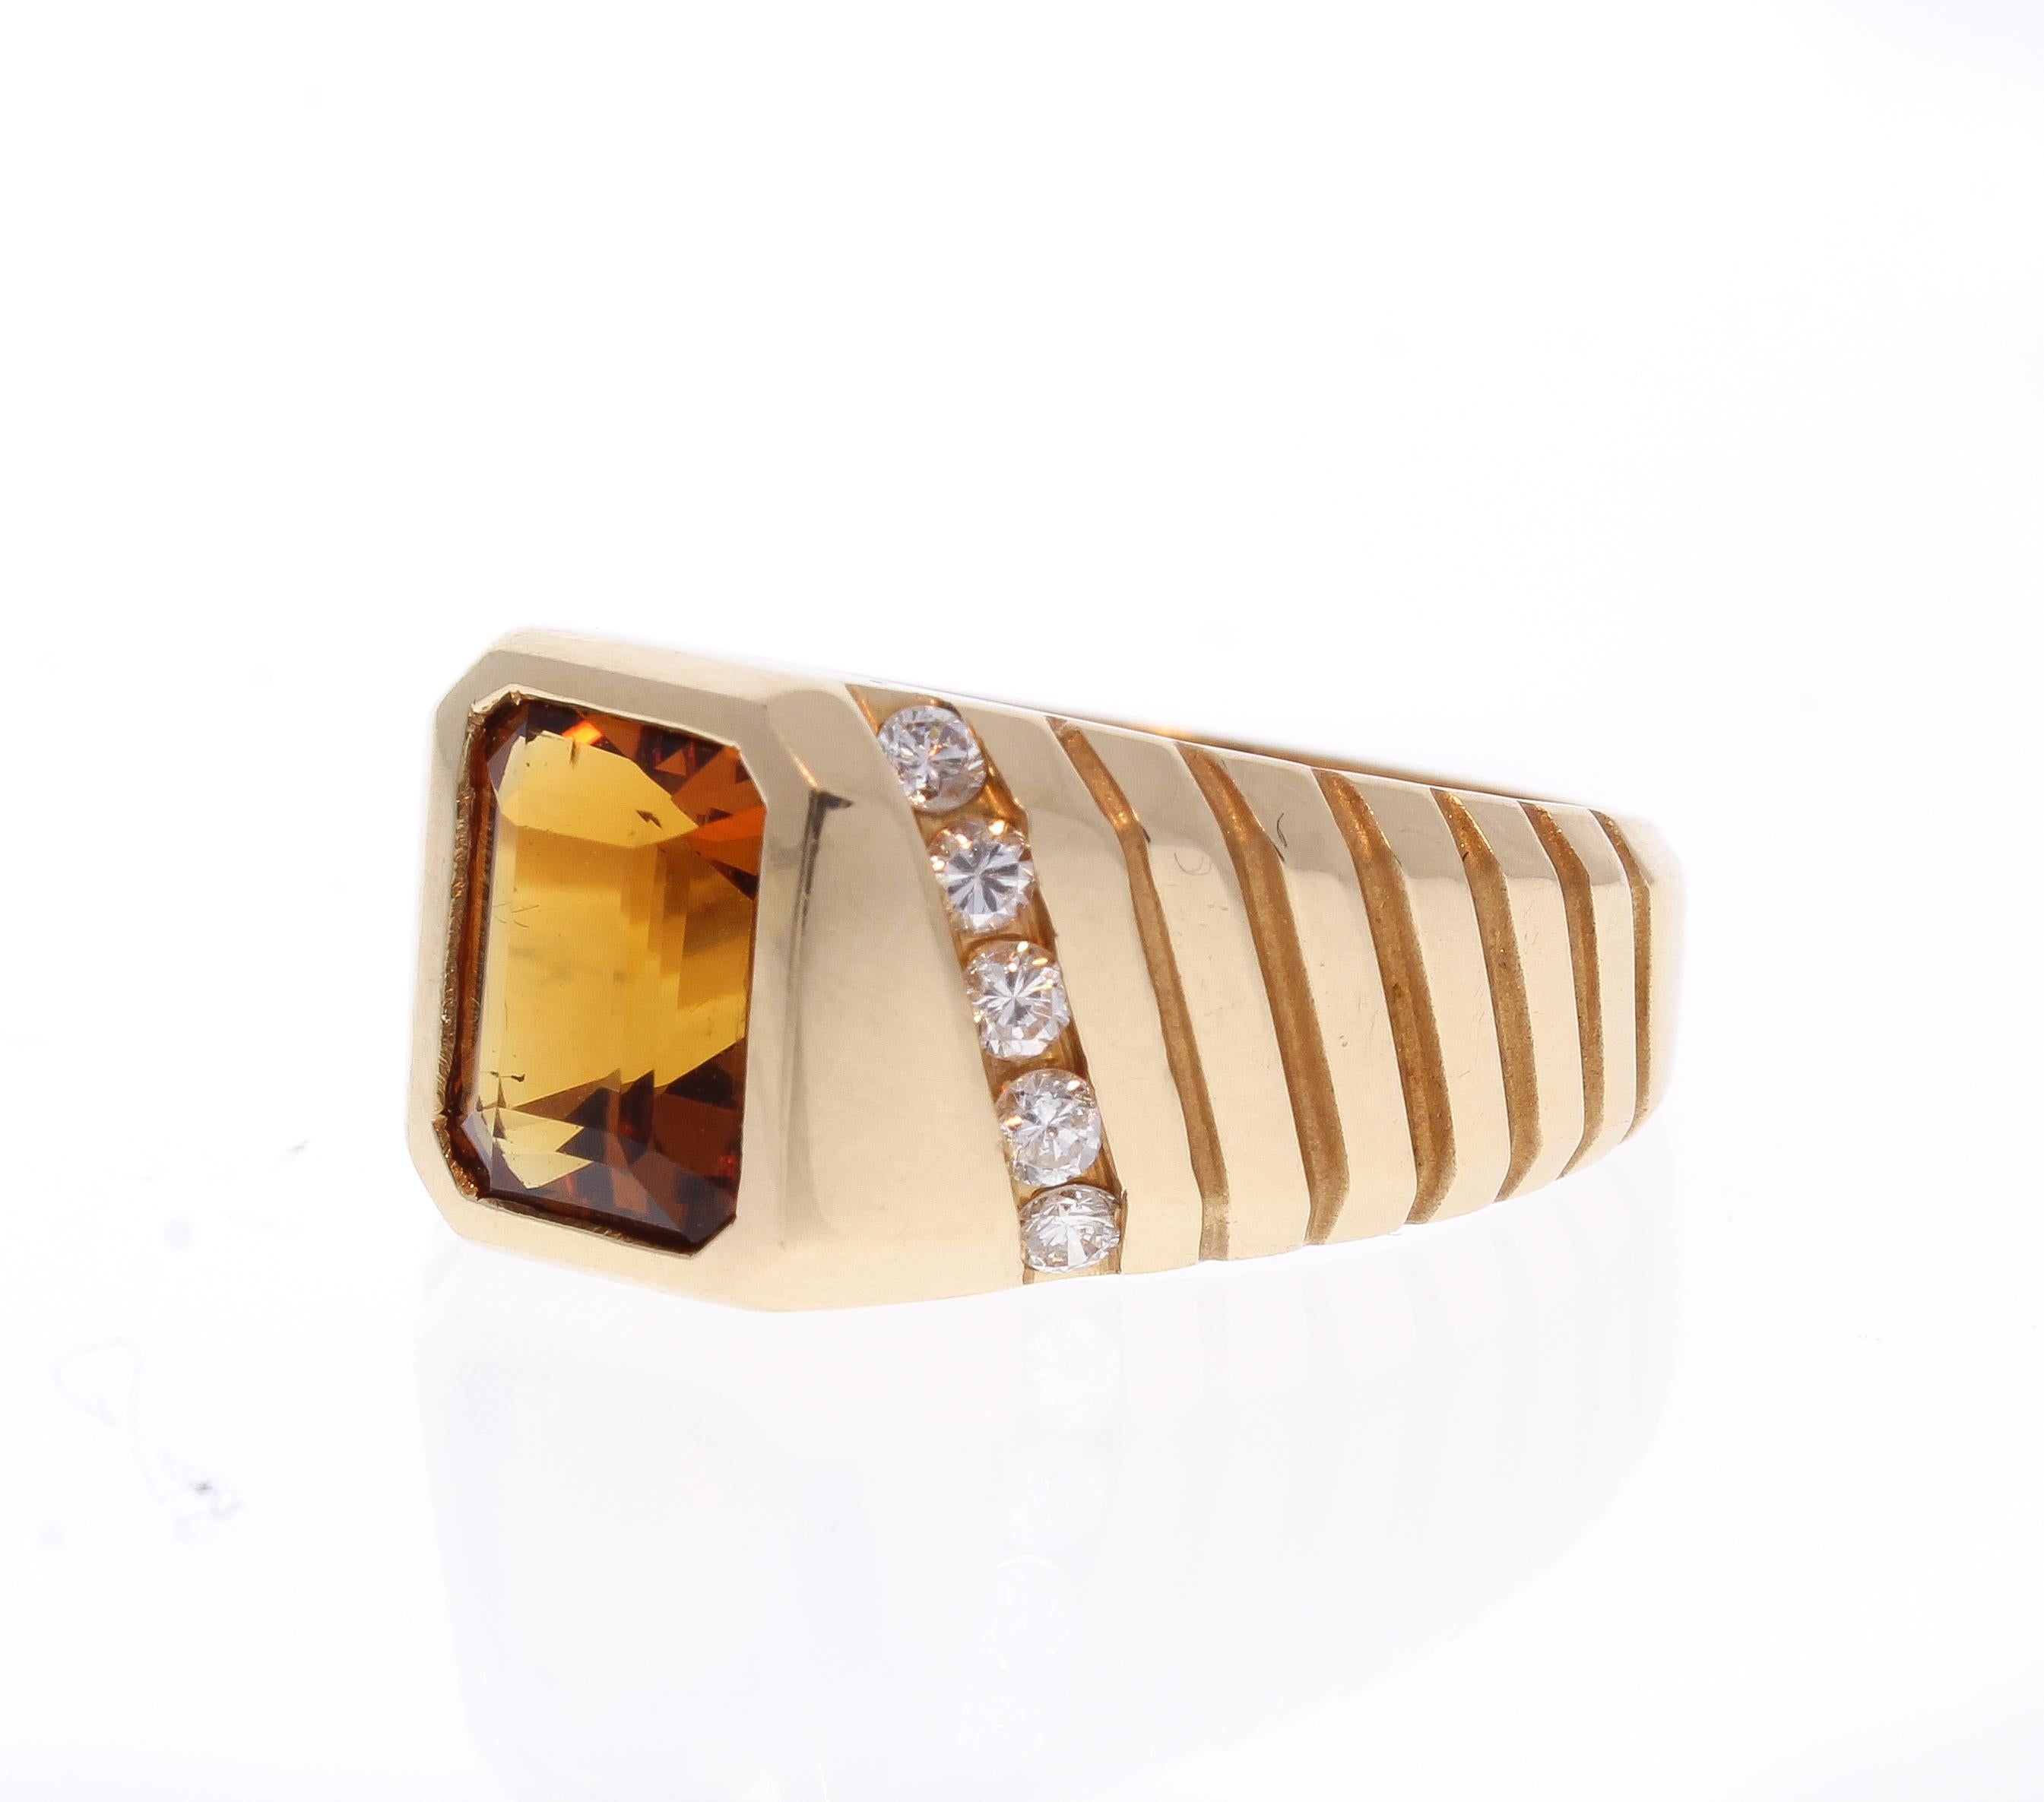 Contemporary 3.50 Carat Emerald Cut Citrine and Diamond Cocktail Ring in 14 Karat Yellow Gold